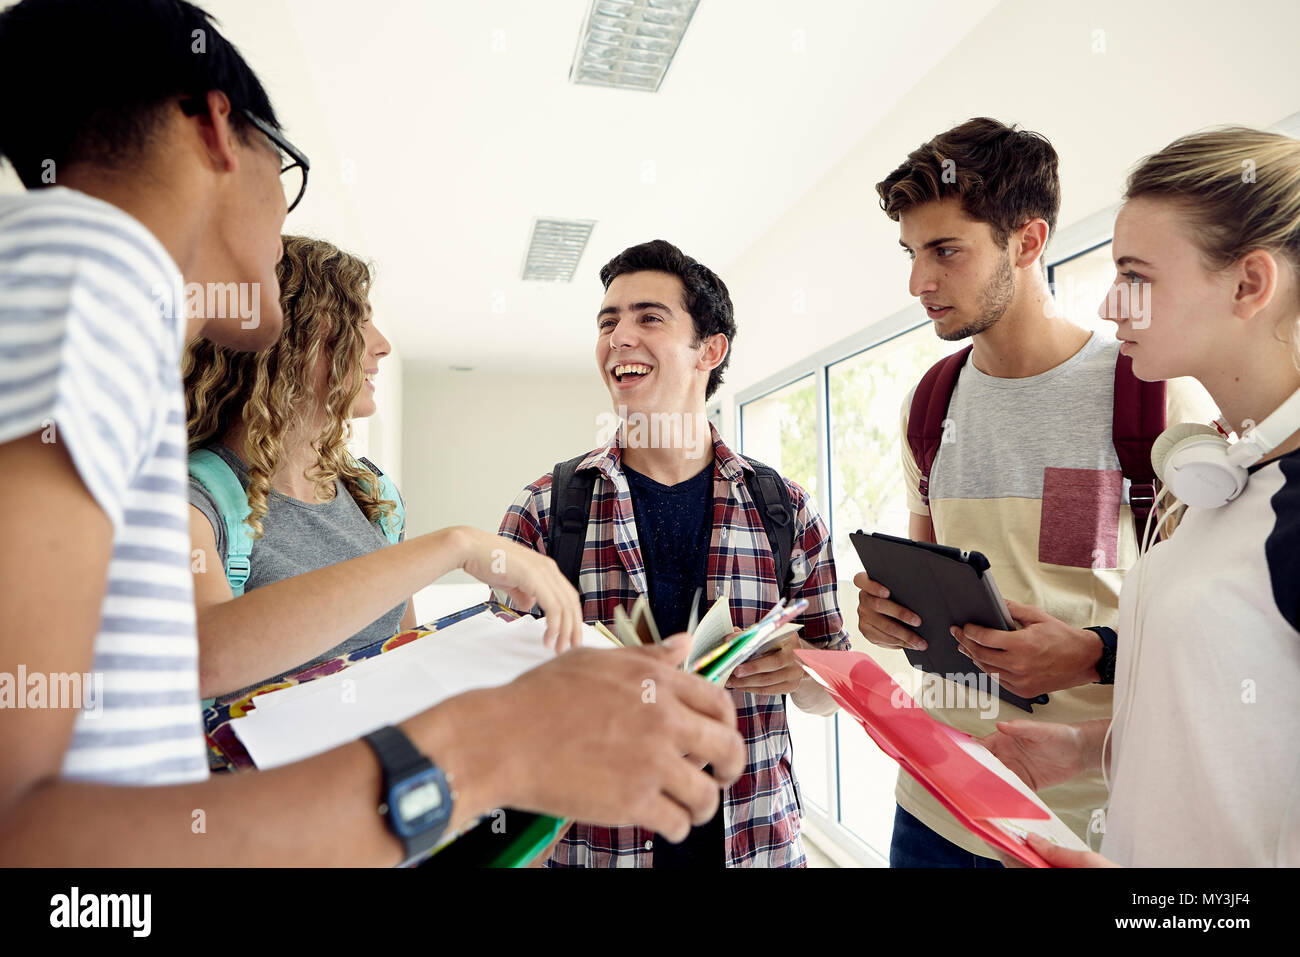 Group of students chatting together in school corridor Stock Photo